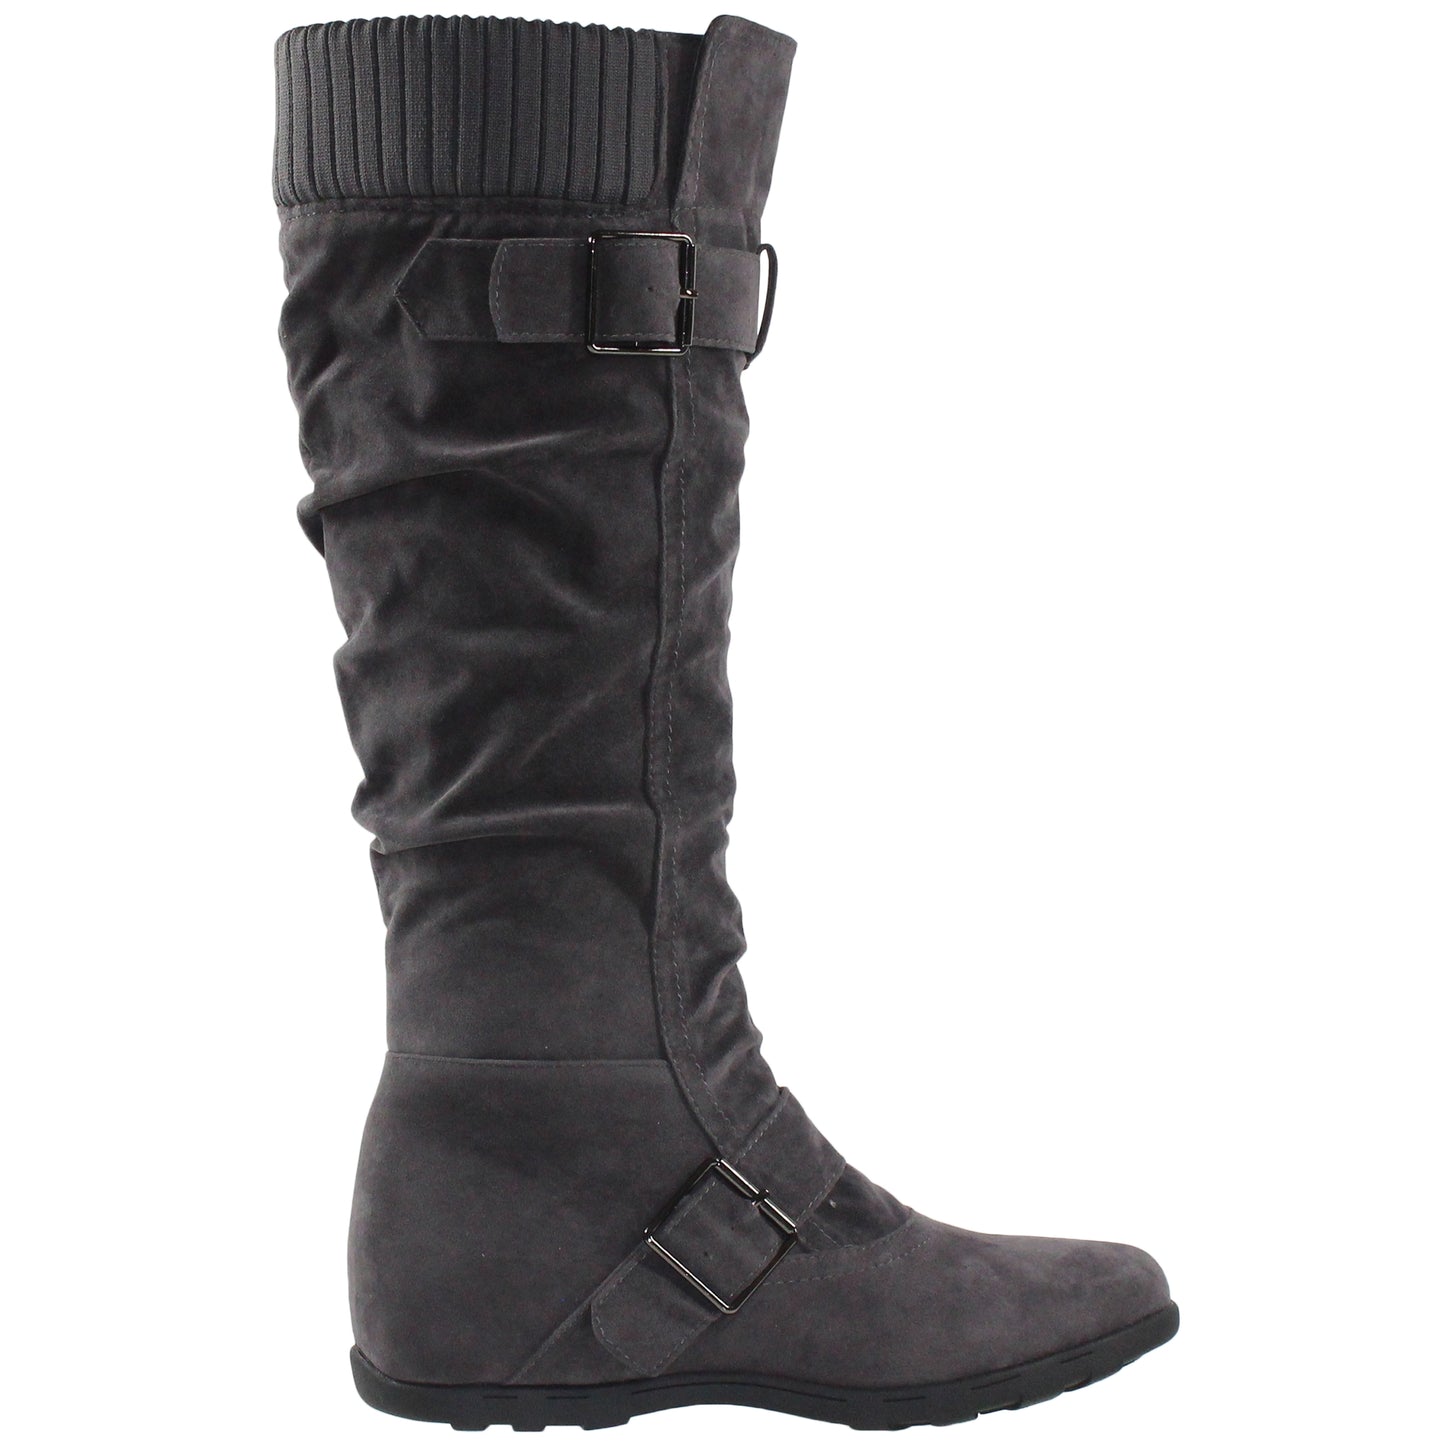 SOBEYO Women's Boots Ruched Knit Cuff Double Straps Buckles Gray Suede